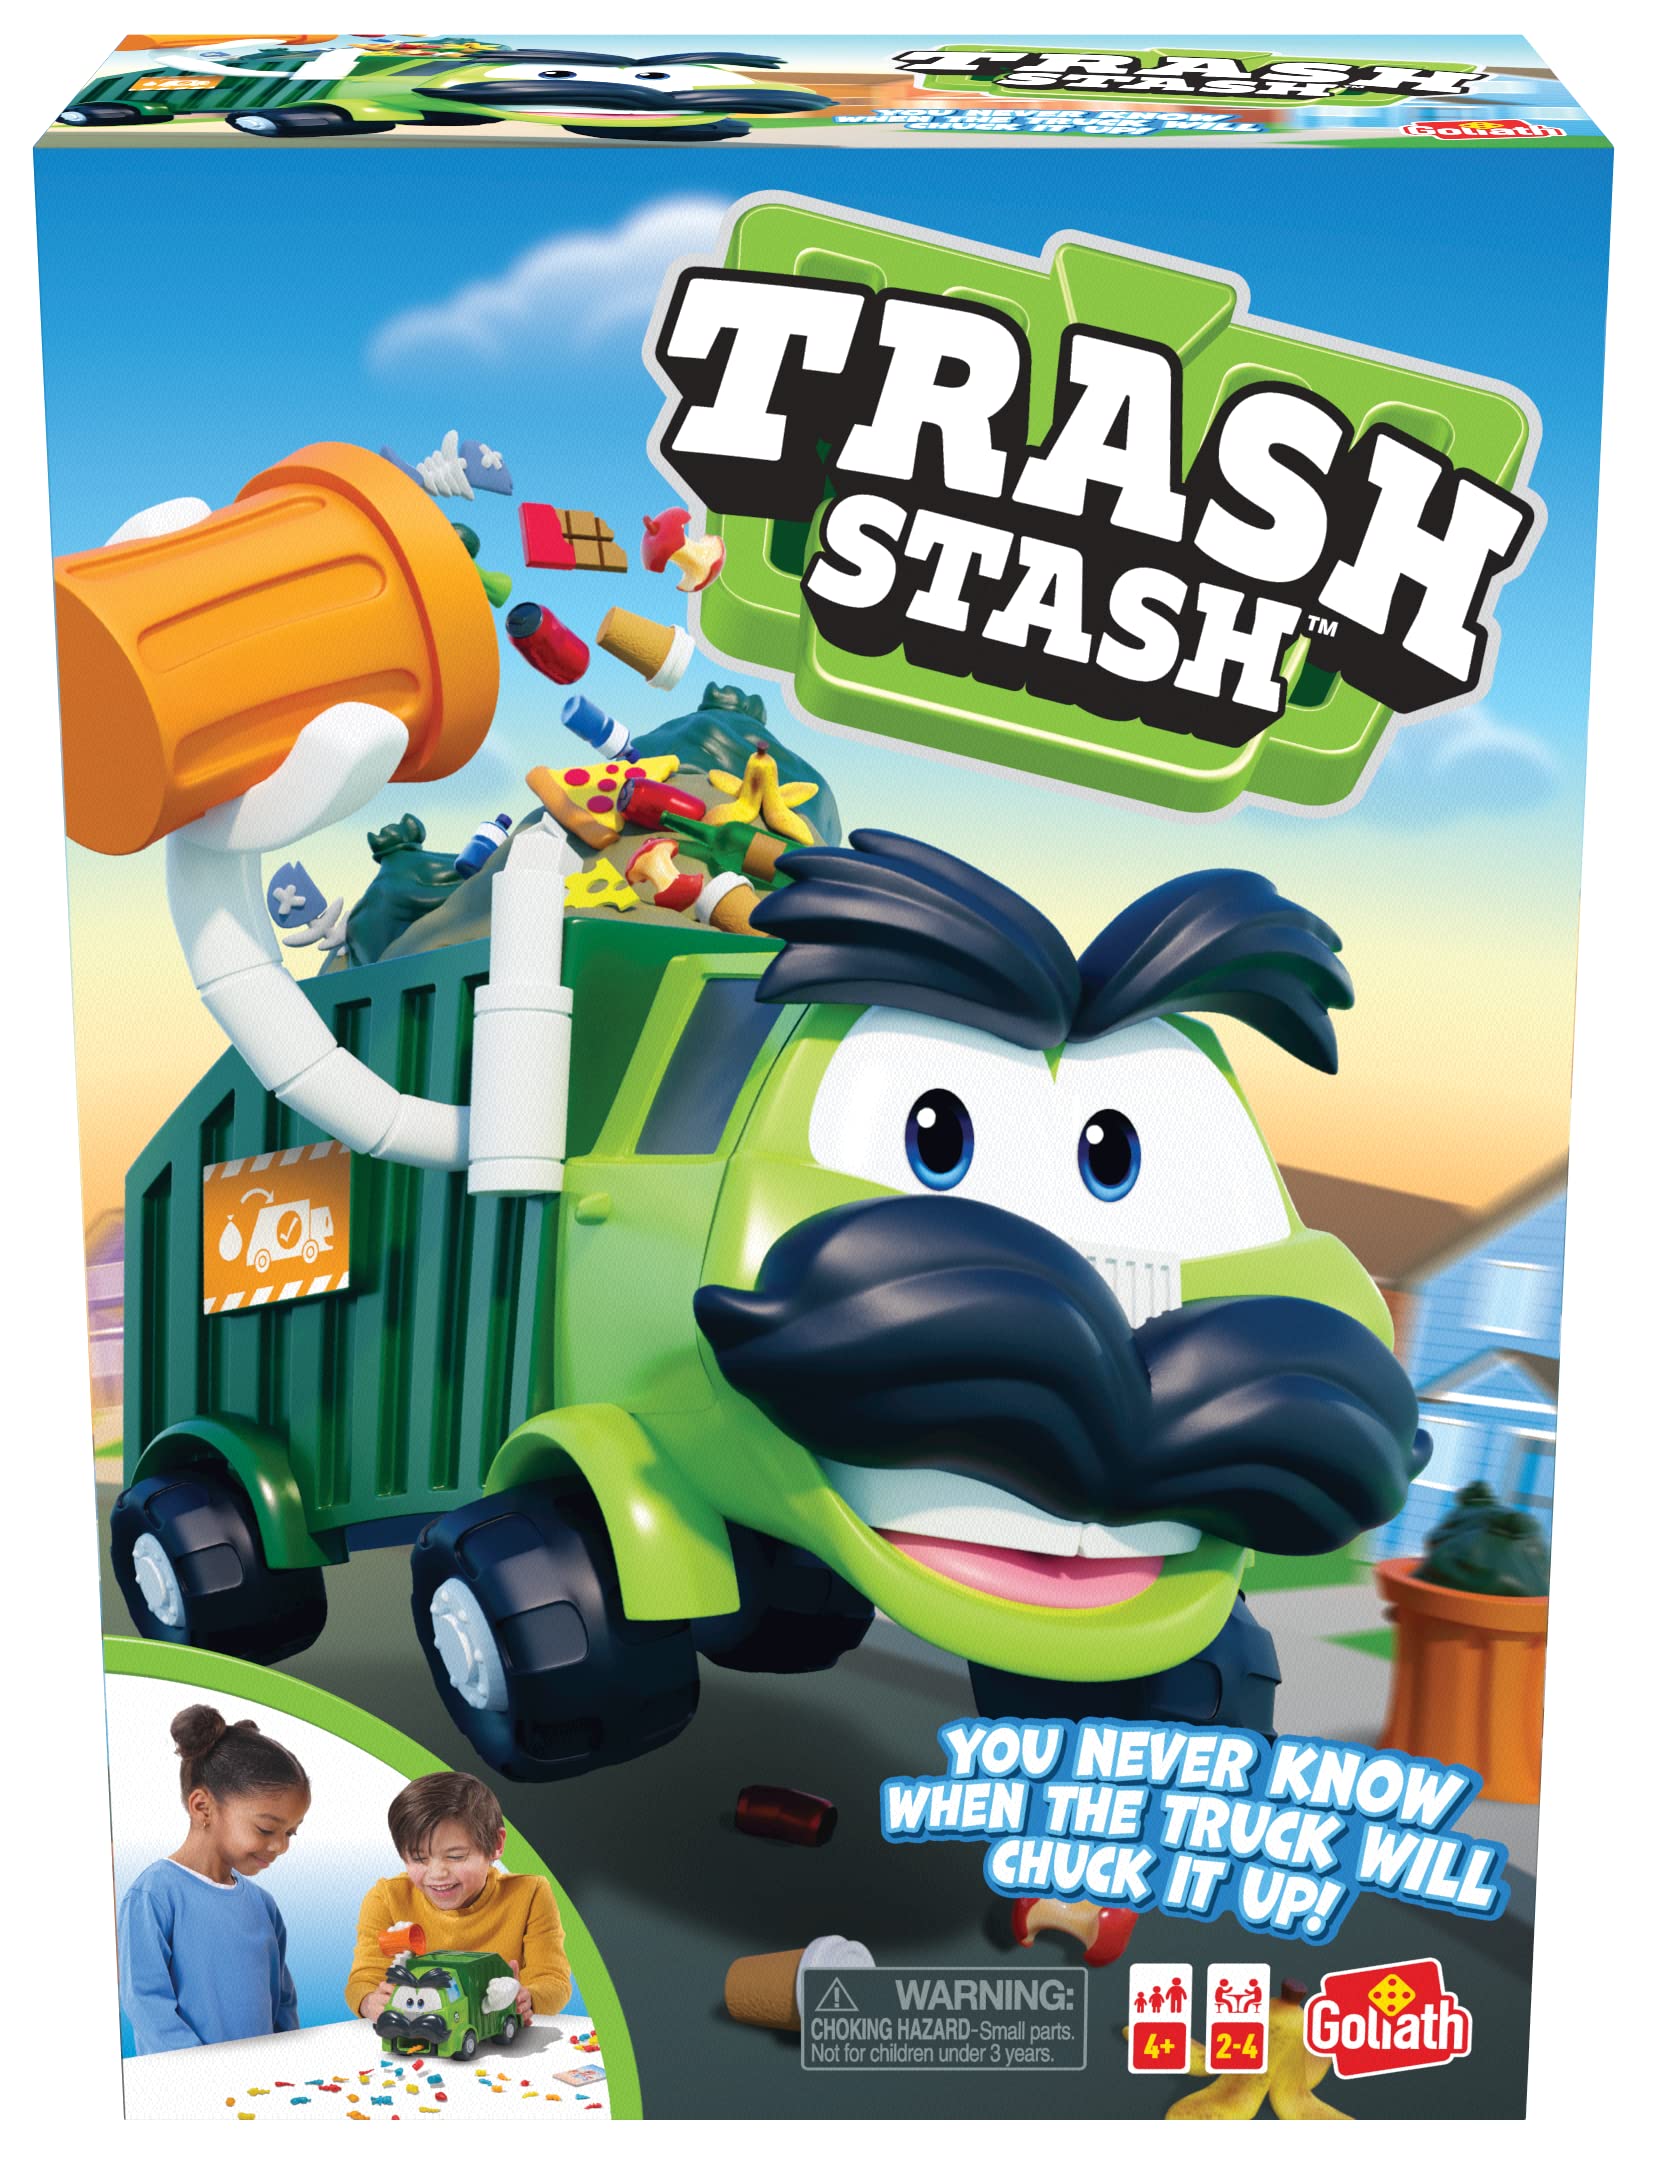 Goliath Trash Stash Game - Fill Trashcan, Watch It Dump Into Garbage Truck Or Truck Chucks It Up - No Reading Required, Ages 4 and Up, 2-4 Players , Green